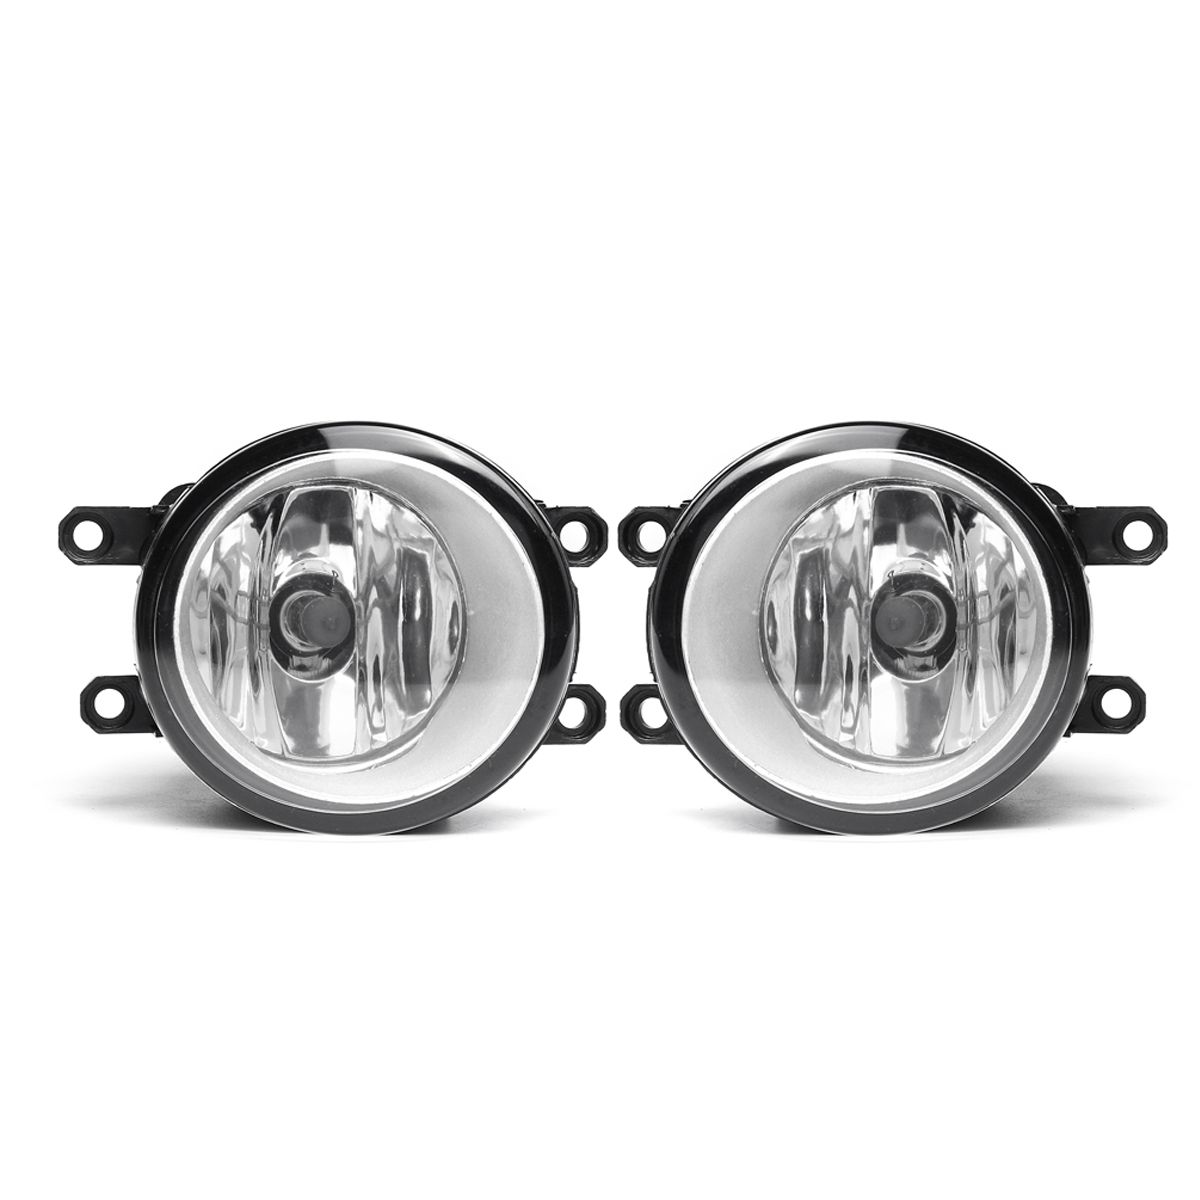 Car-Front-Bumper-Fog-Lights-Lamps-Kit-with-Chrome-Covers-Amber-for-Toyota-Camry-2012-2014-1406878